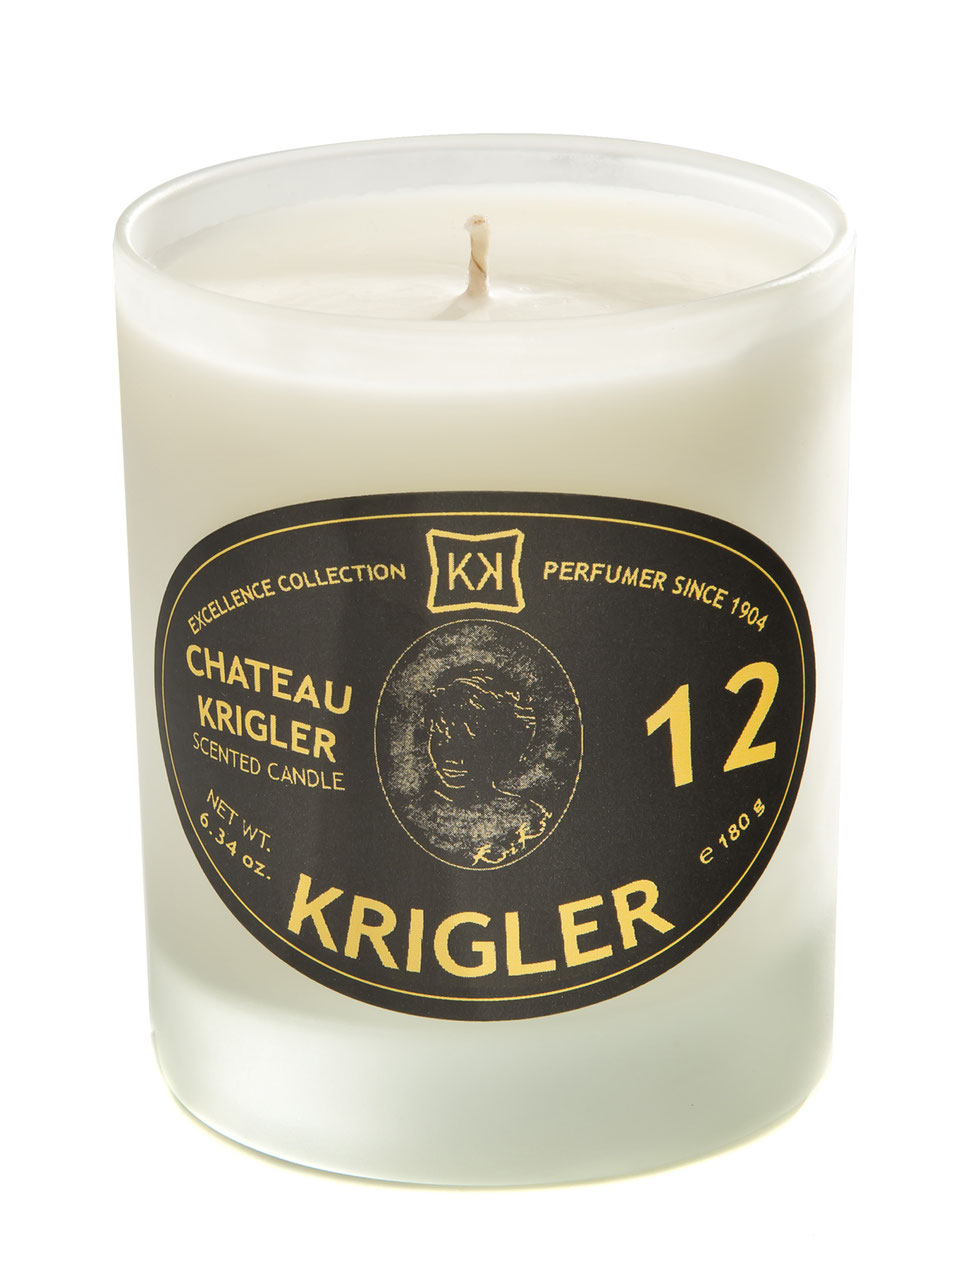 CHATEAU KRIGLER 12 Scented candle